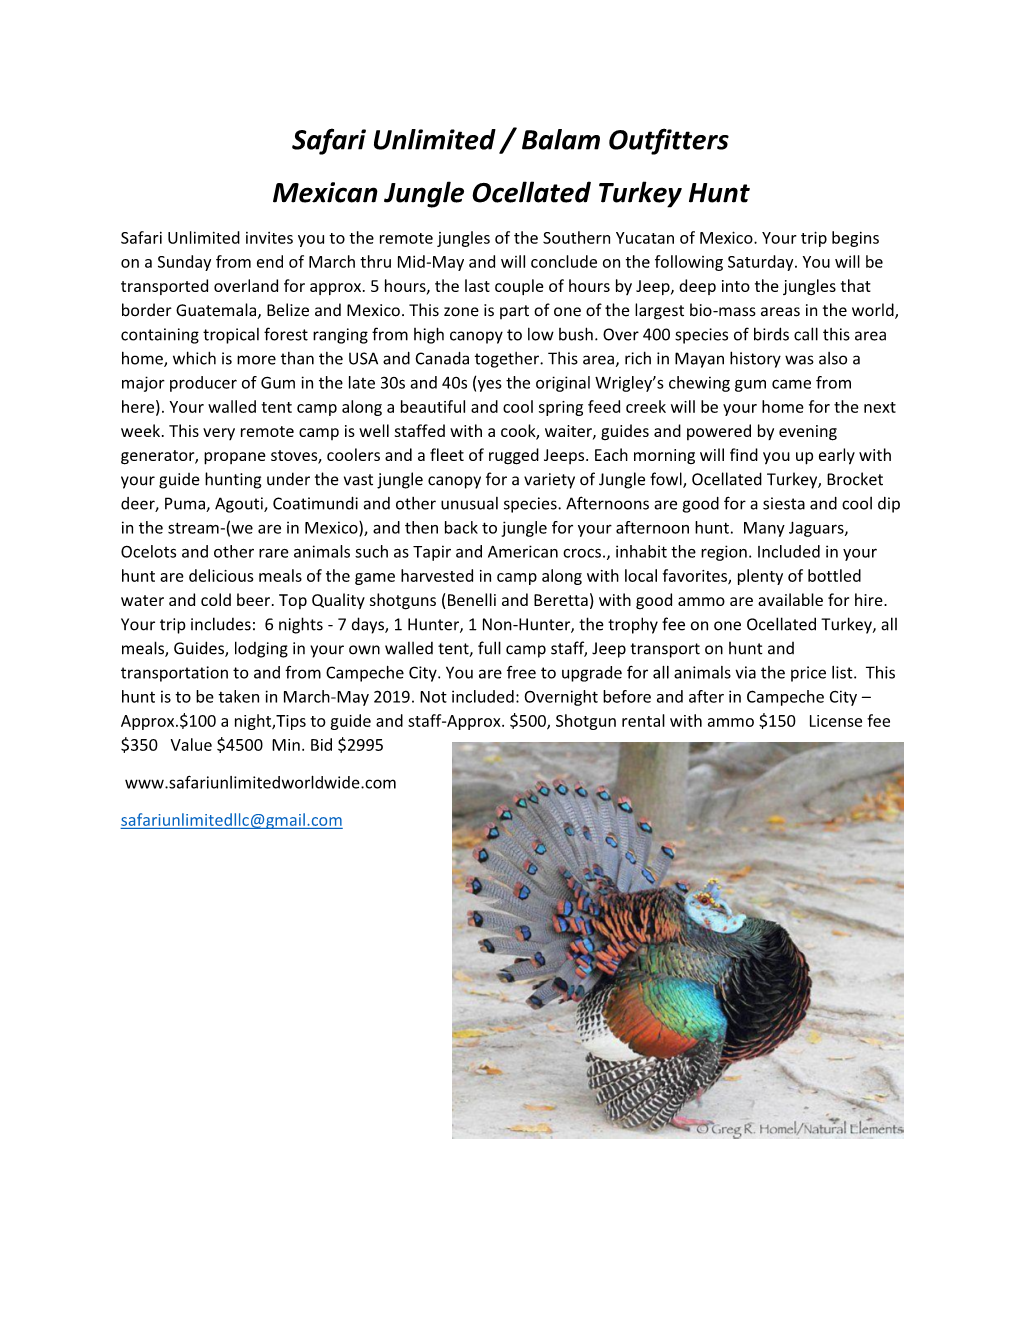 Safari Unlimited / Balam Outfitters Mexican Jungle Ocellated Turkey Hunt